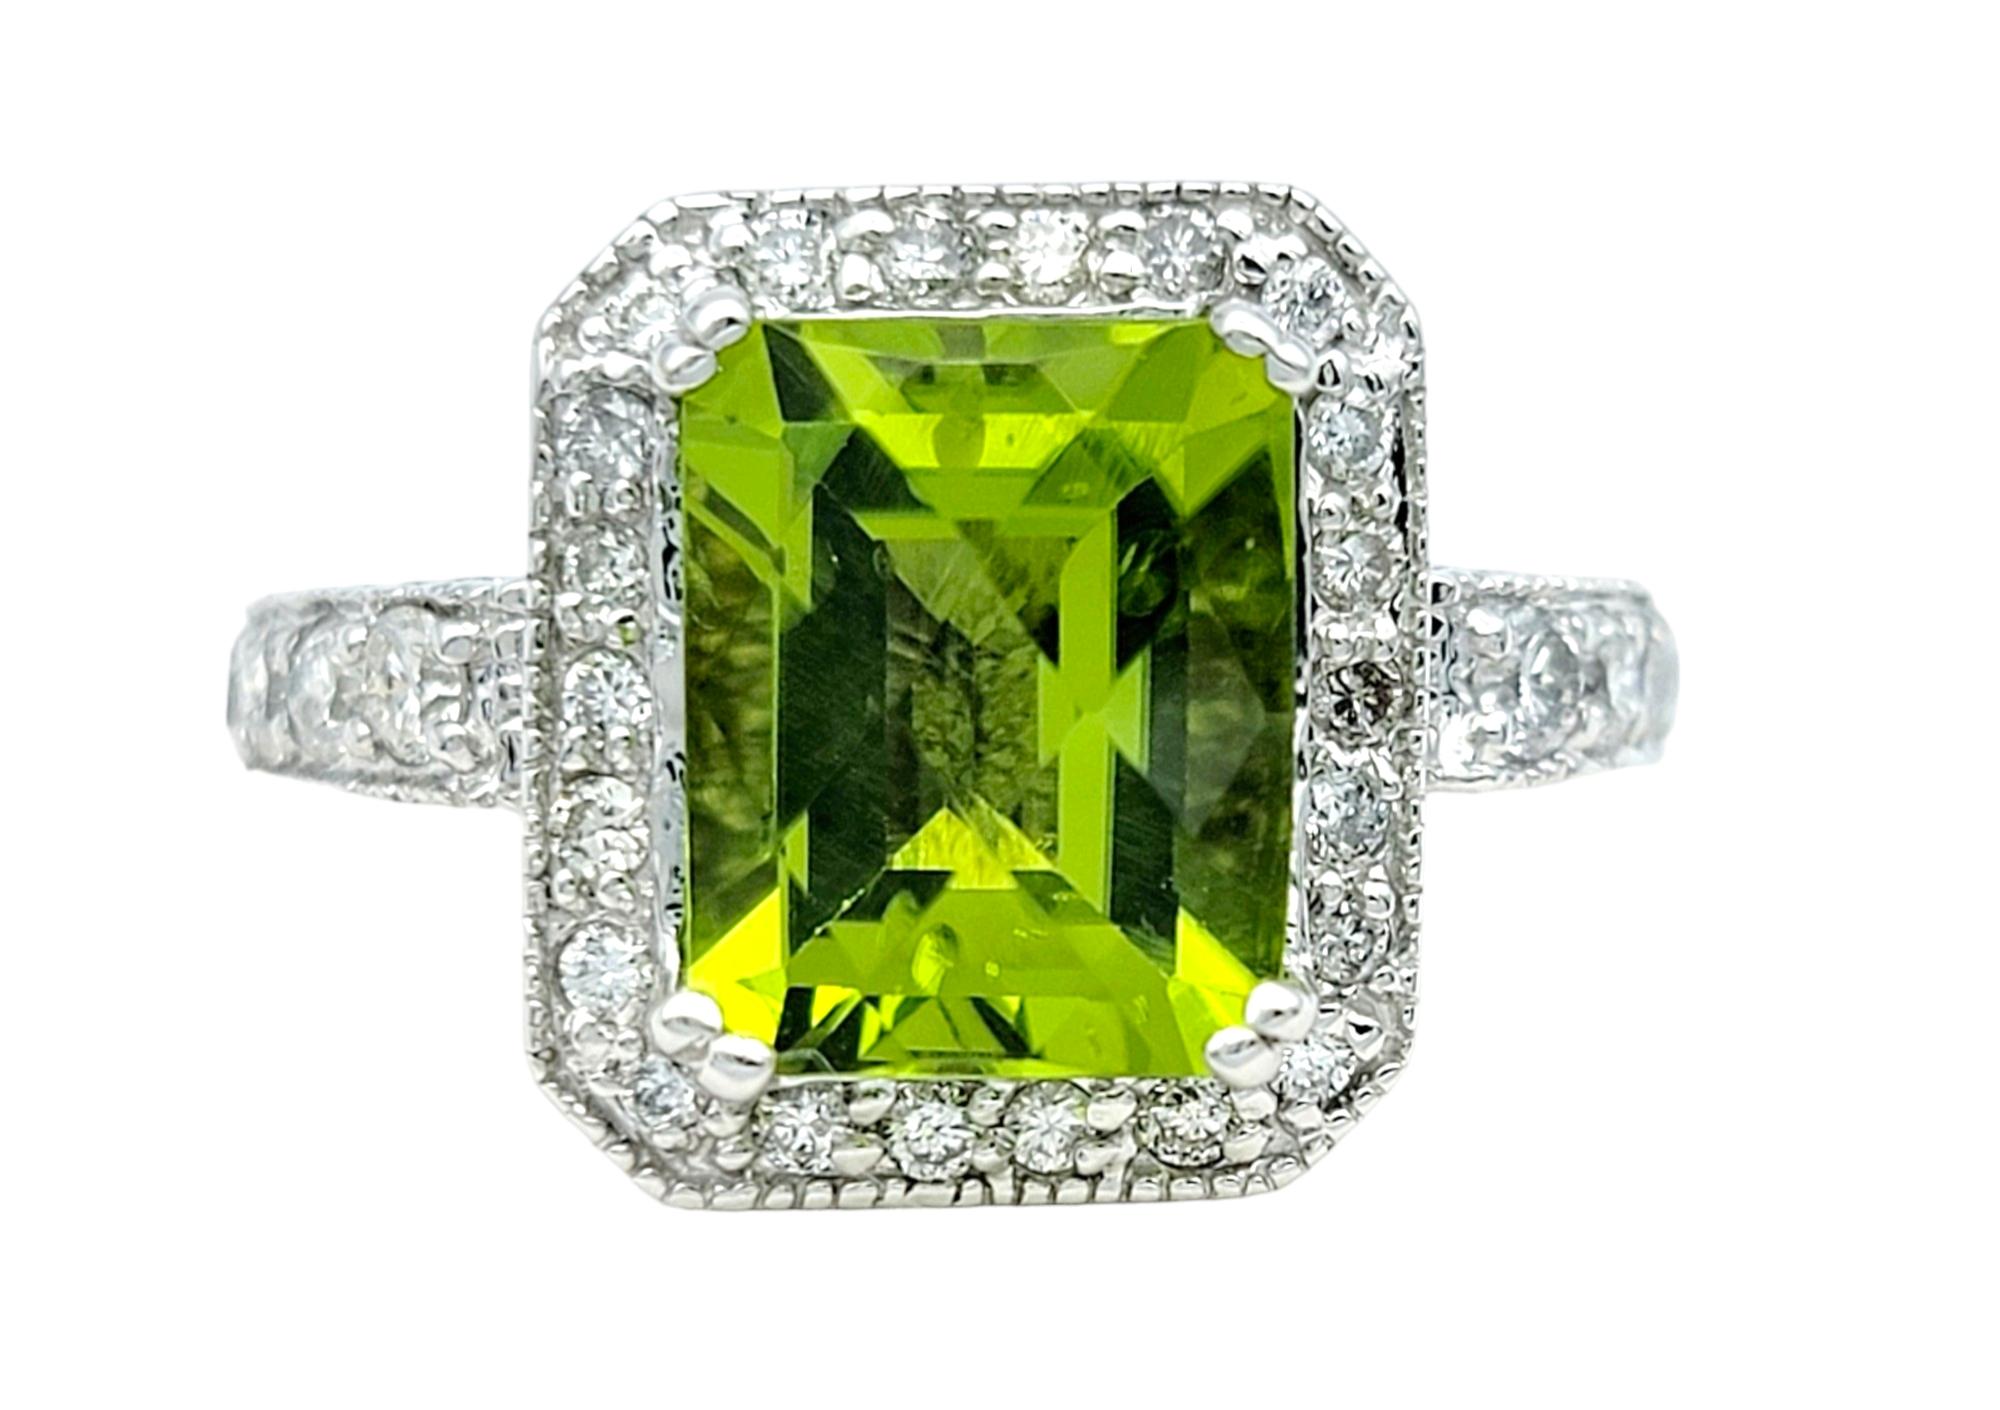 Ring Size: 6.75

This exquisite ring features a mesmerizing cut-cornered rectangular checkerboard peridot as its focal point, exuding a captivating green hue that symbolizes vitality and renewal. Surrounded by a sparkling halo of diamonds, the